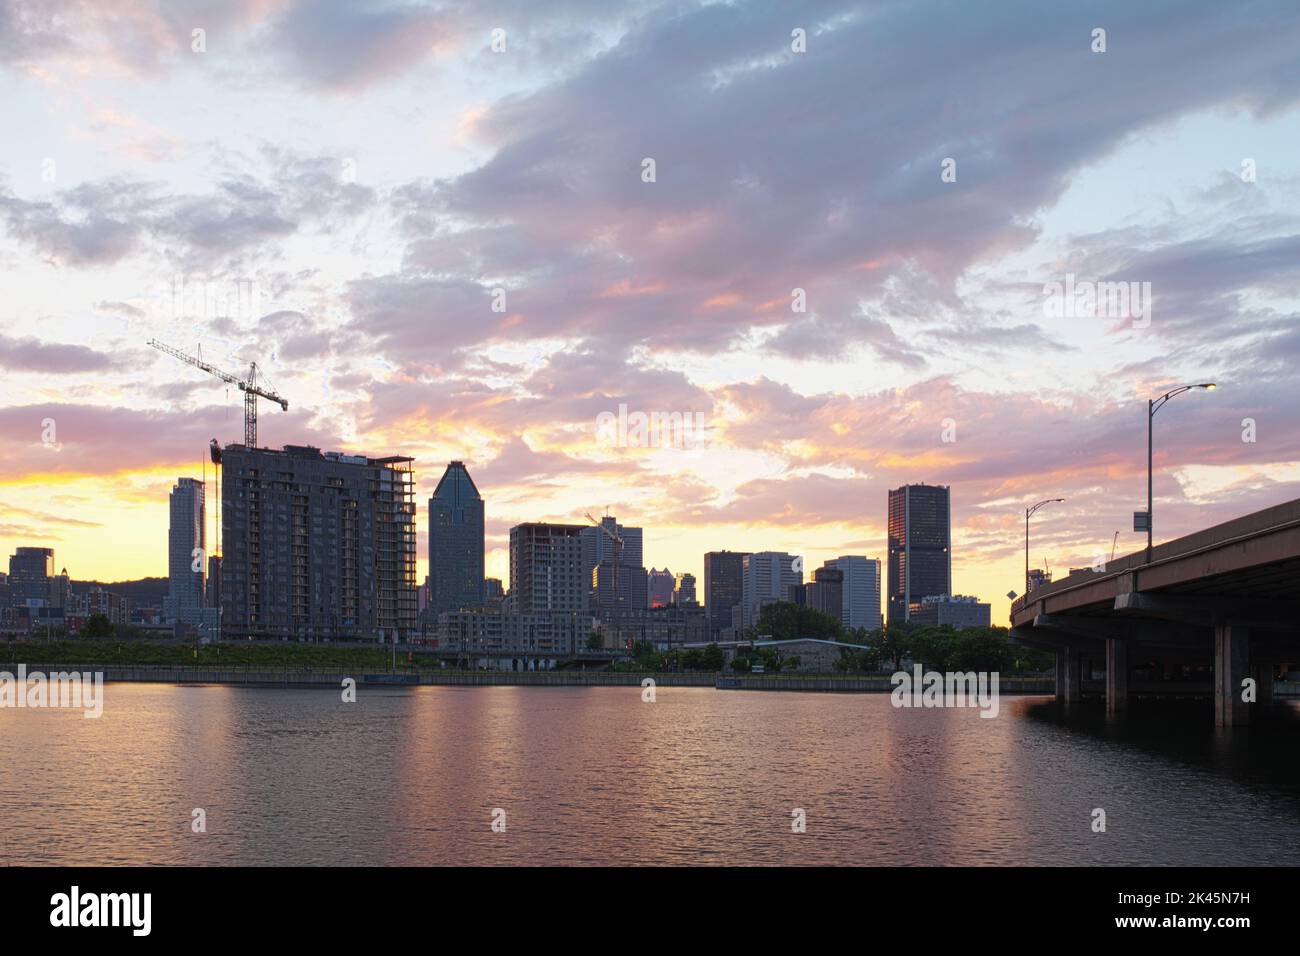 The Quebec city skyline and construction, downtown view from across the St Lawrence River at dawn. Stock Photo